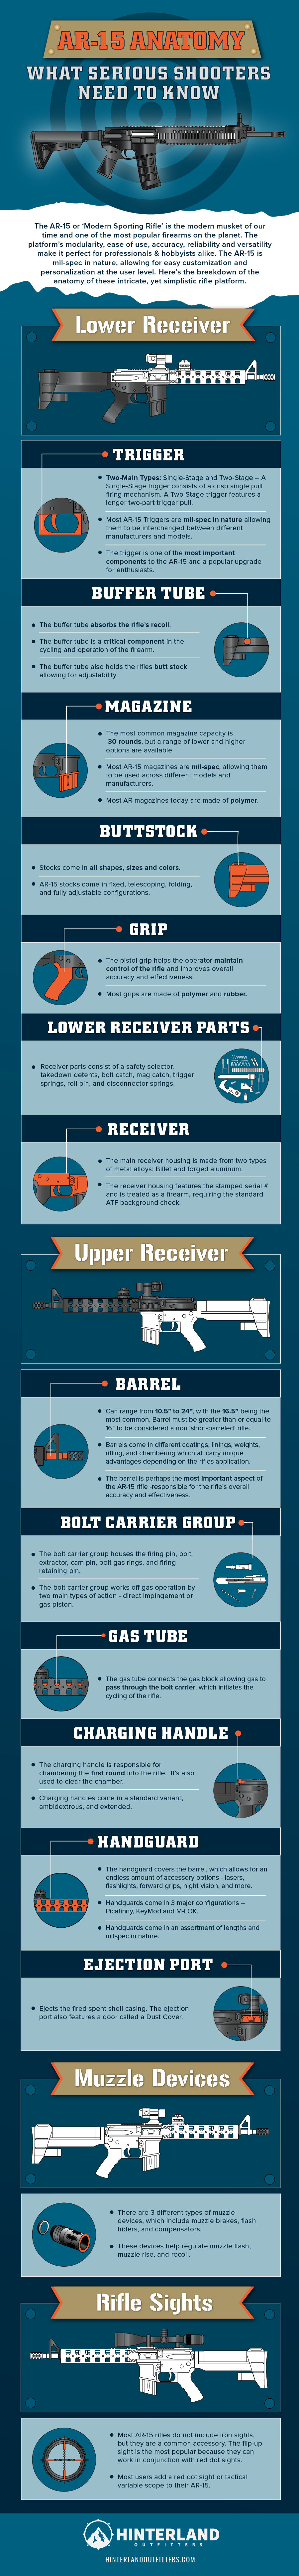 AR-15 Anatomy: What Serious Shooters Need To Know